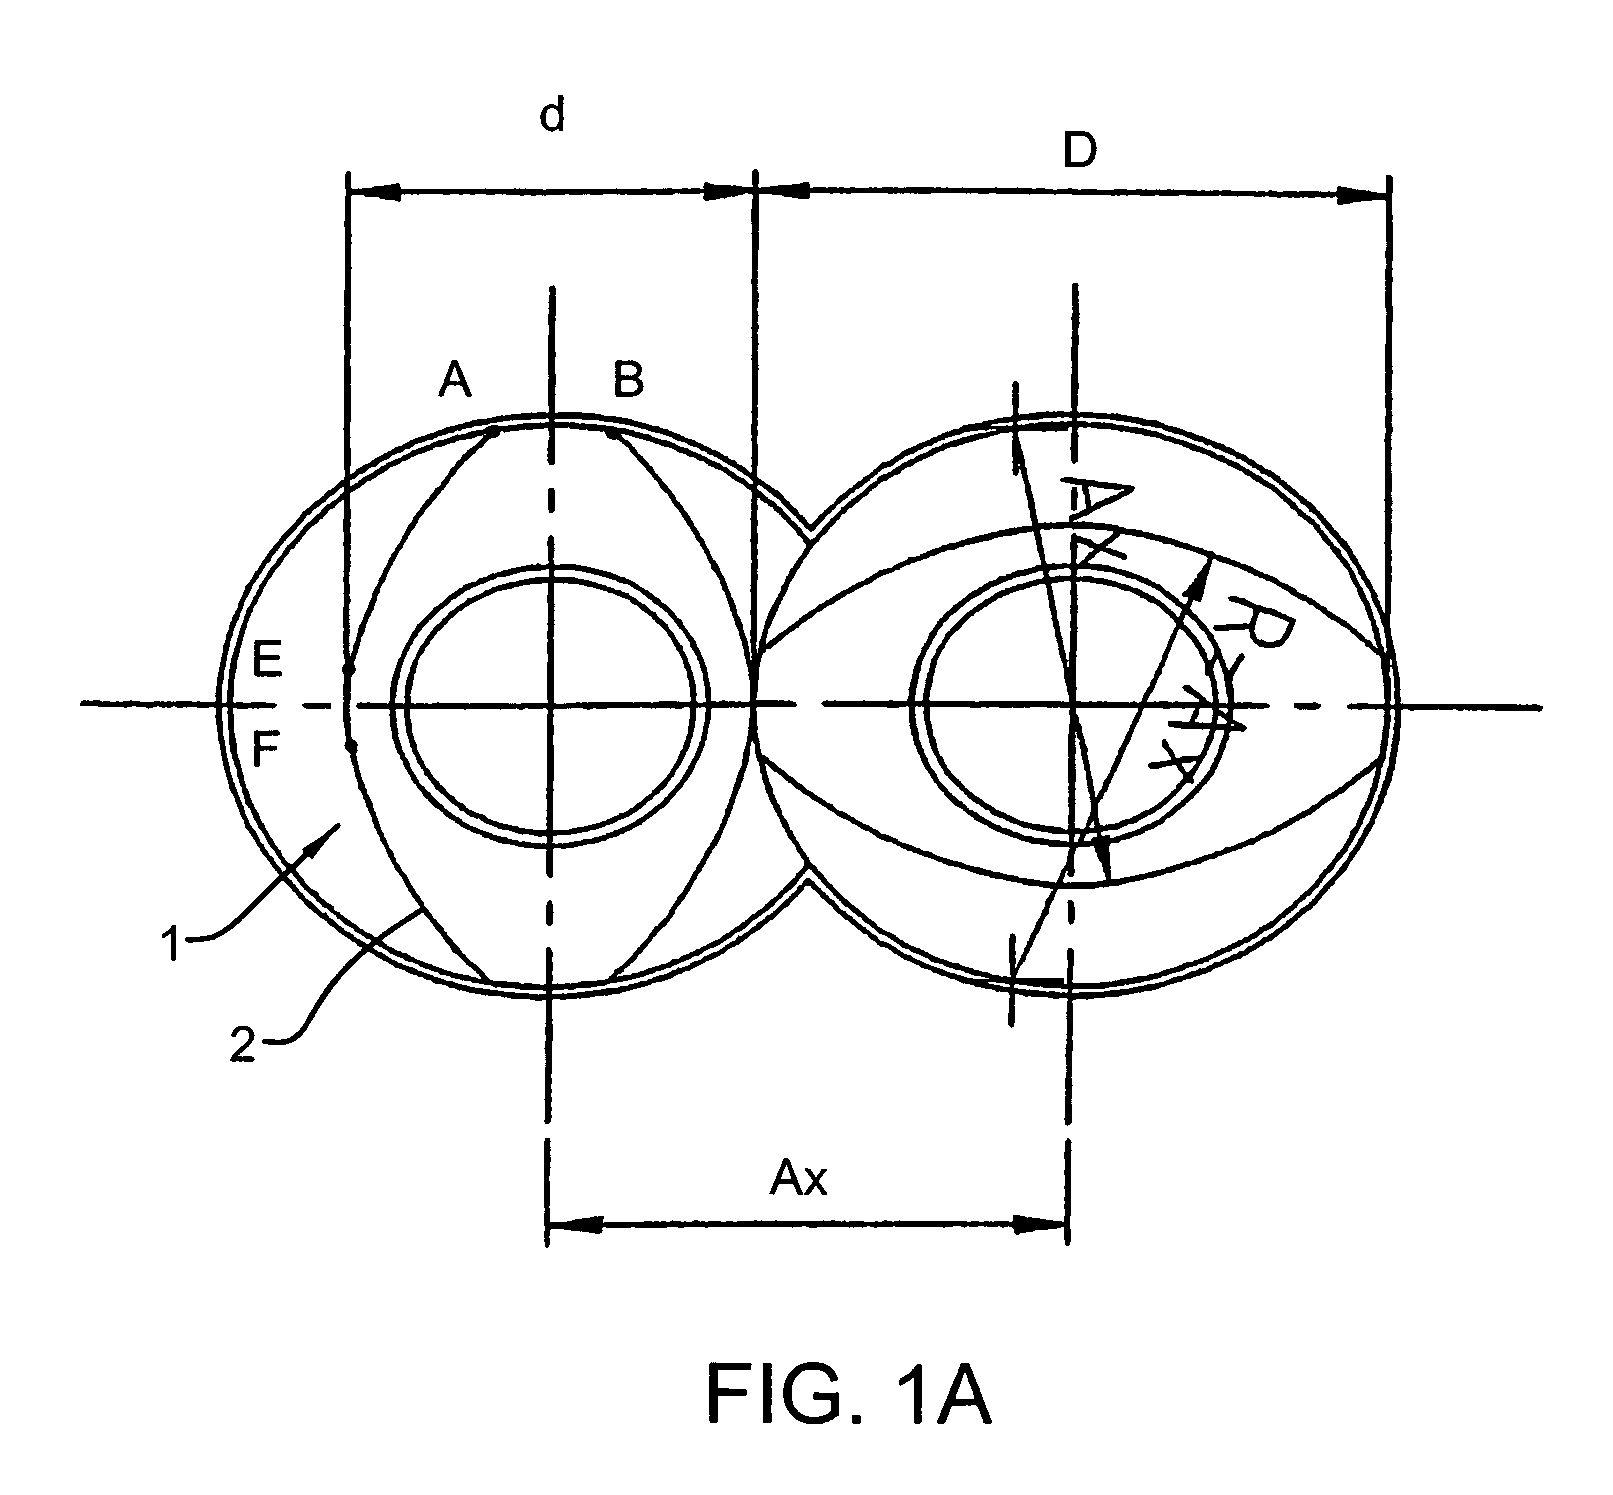 Extruder for continuously working and/or processing flowable materials